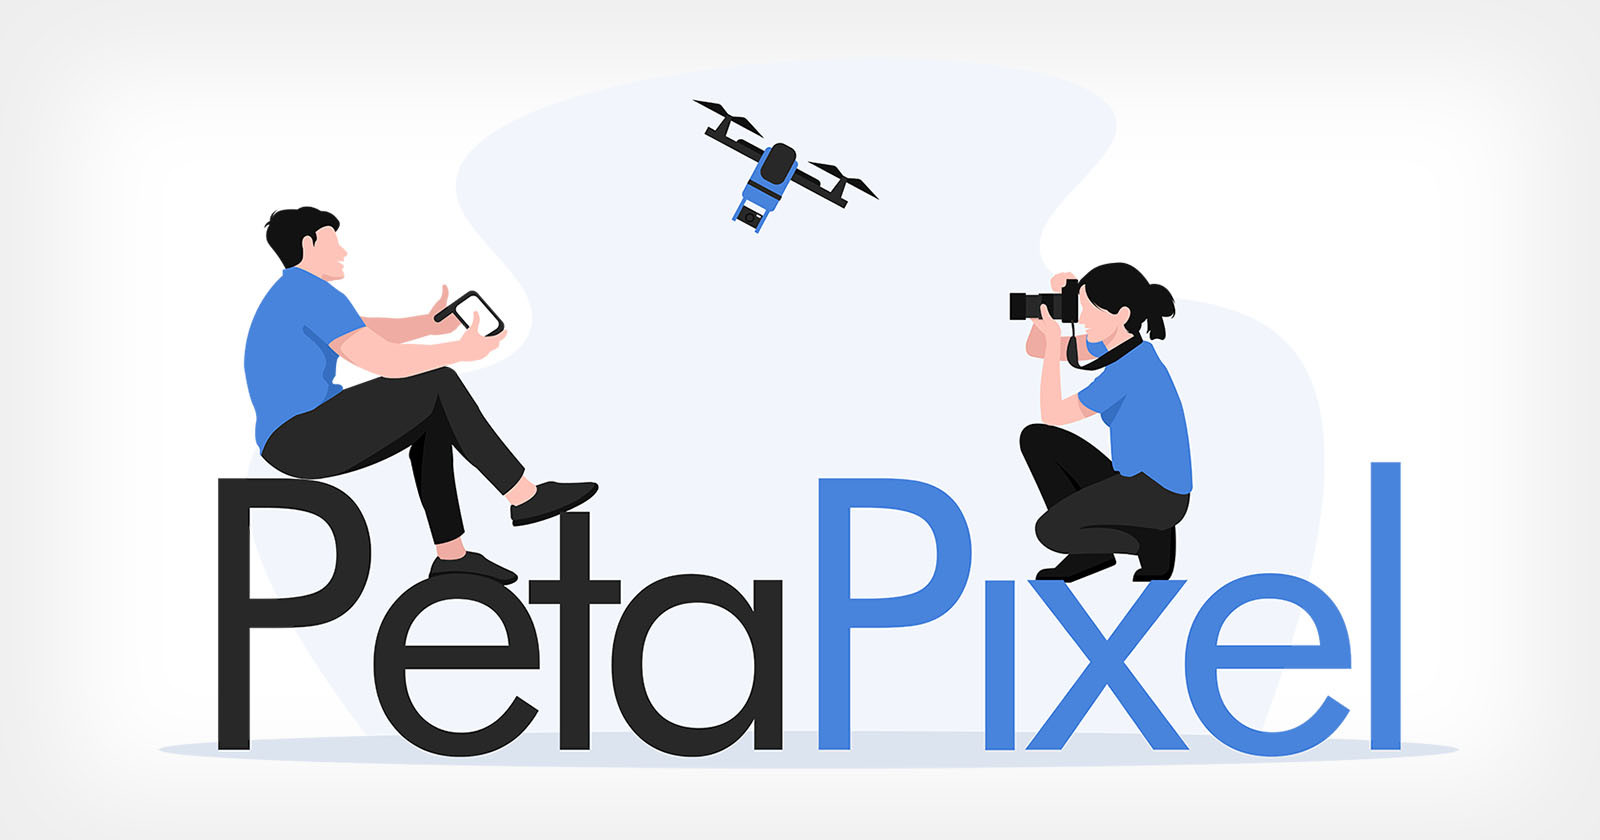 Want to Write for PetaPixel?